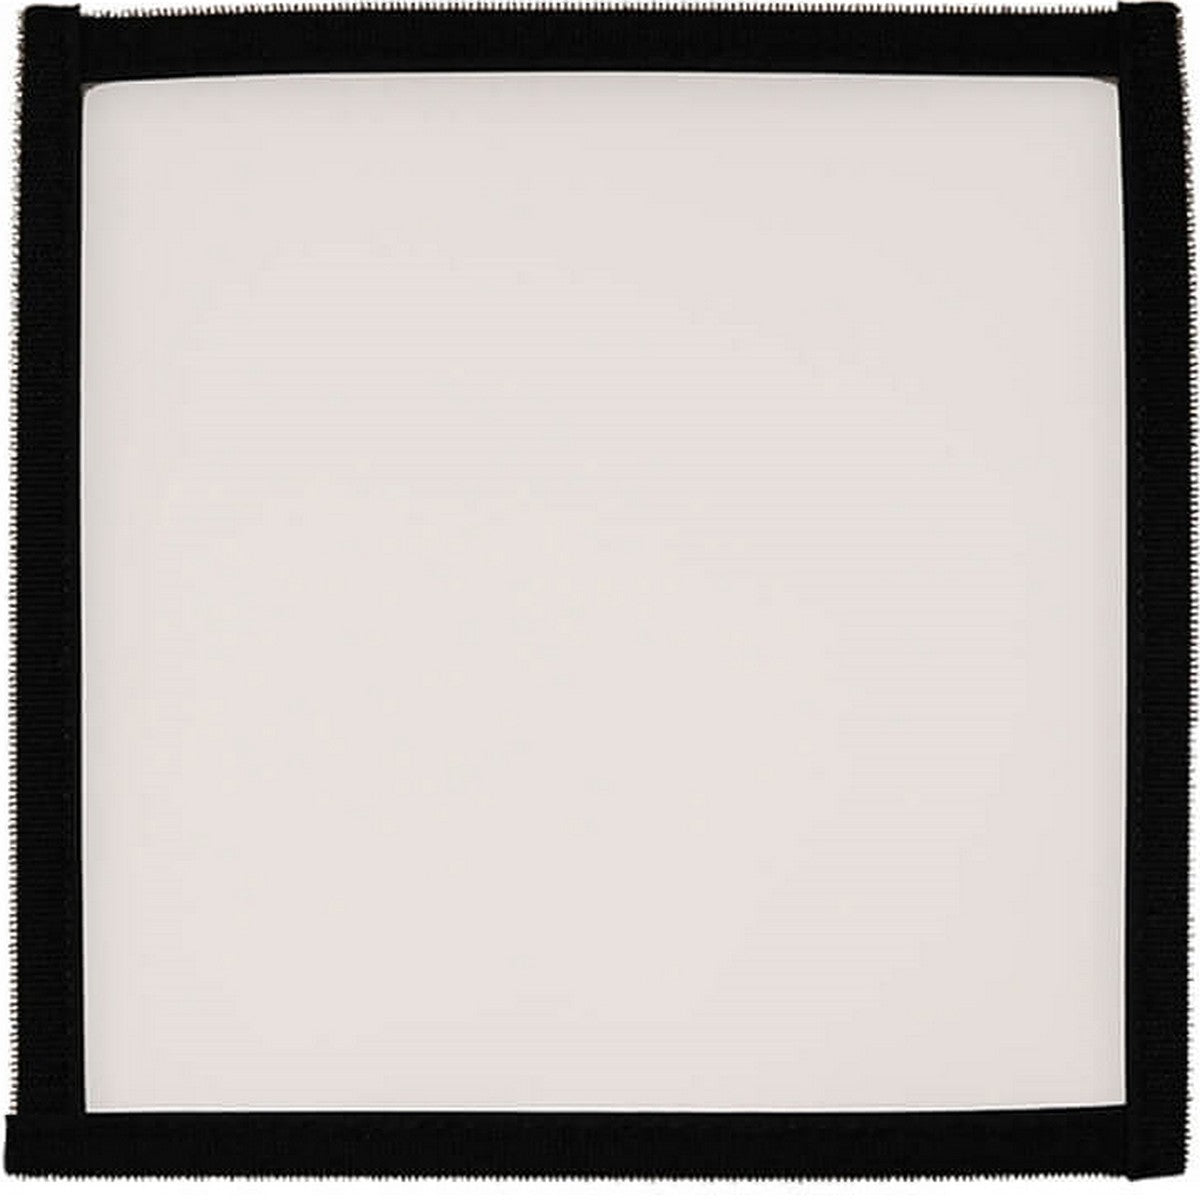 Litepanels Sola ENG Diffuser Filter Only | Diffuser Filter for Softbox 900-0023